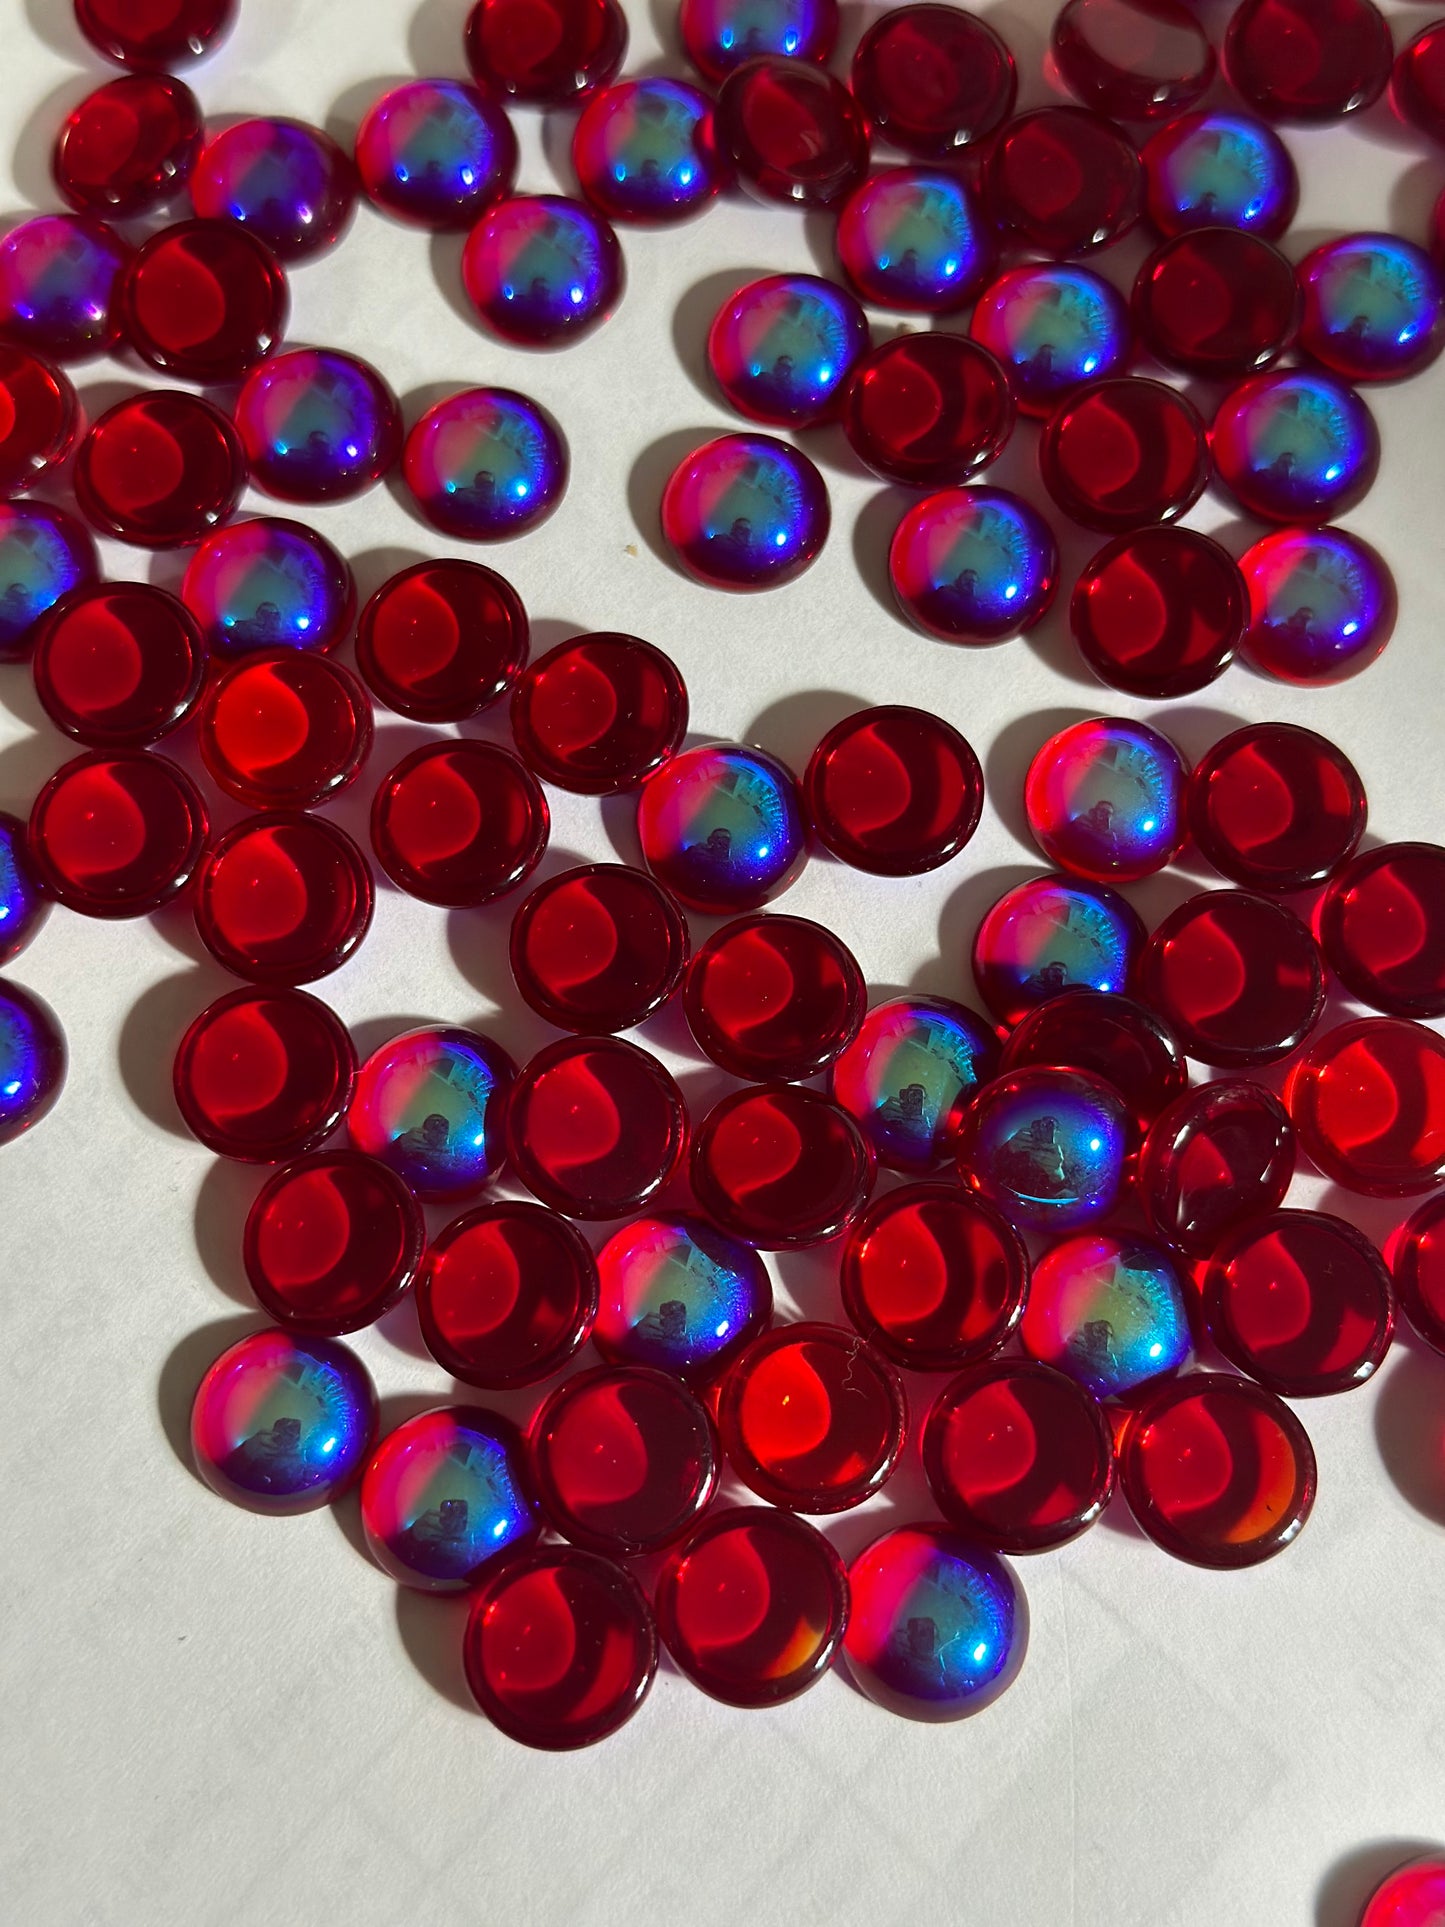 12mm Smooth Flat Back Jewel - Trichroic Iridescence - In Stock to Quickly Ship